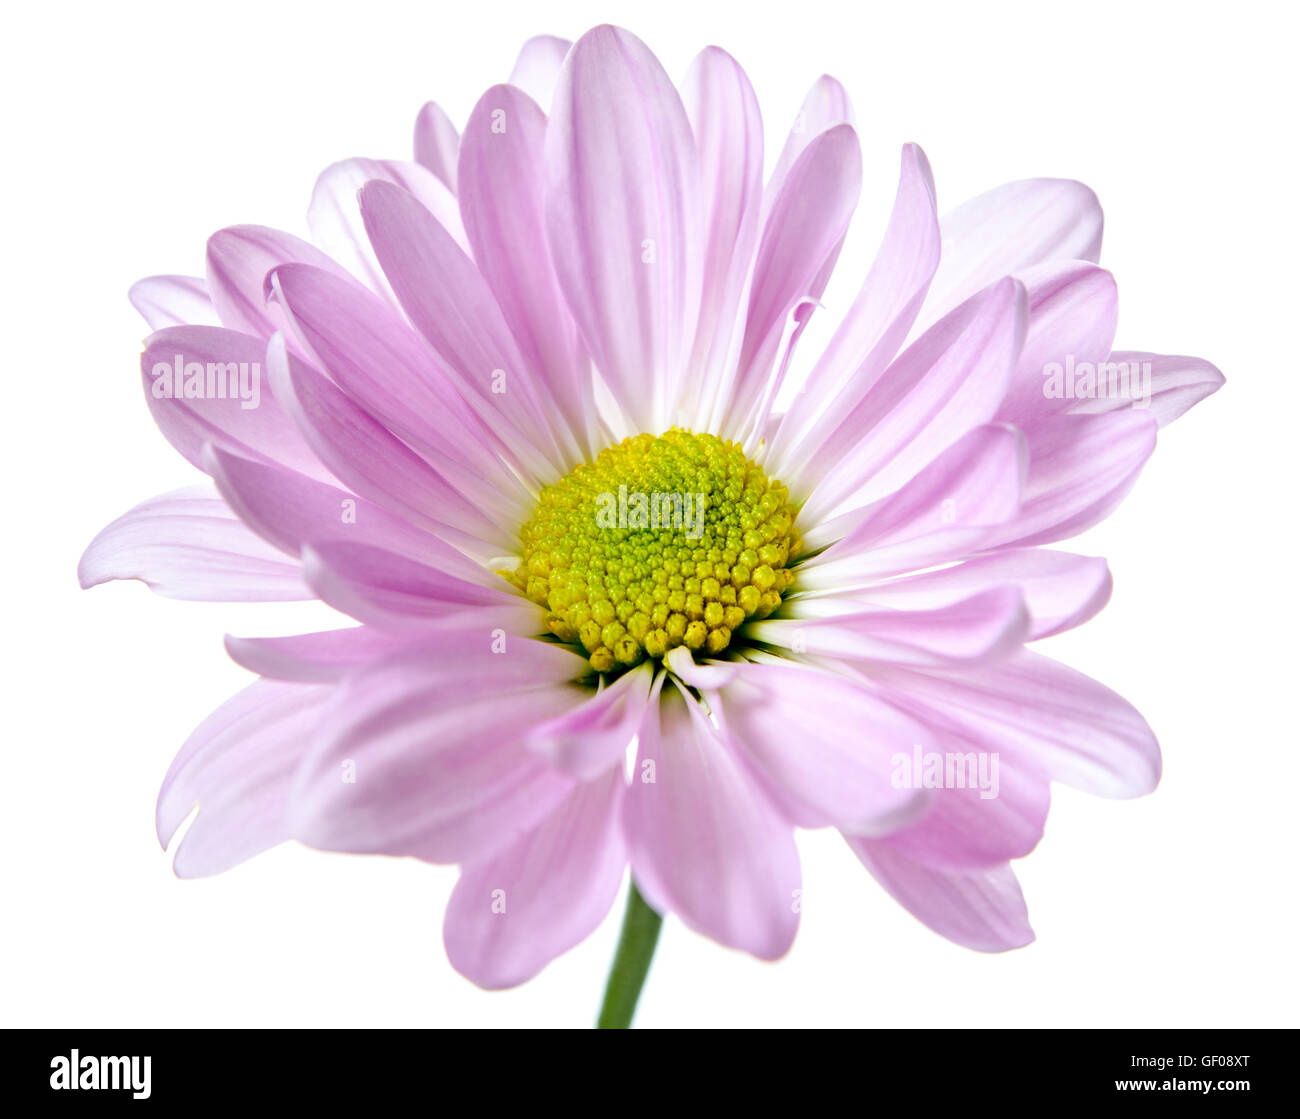 Daisy Flower Pink Yellow Daisies Blossom Floral Flowers Isolated on White Stock Photo